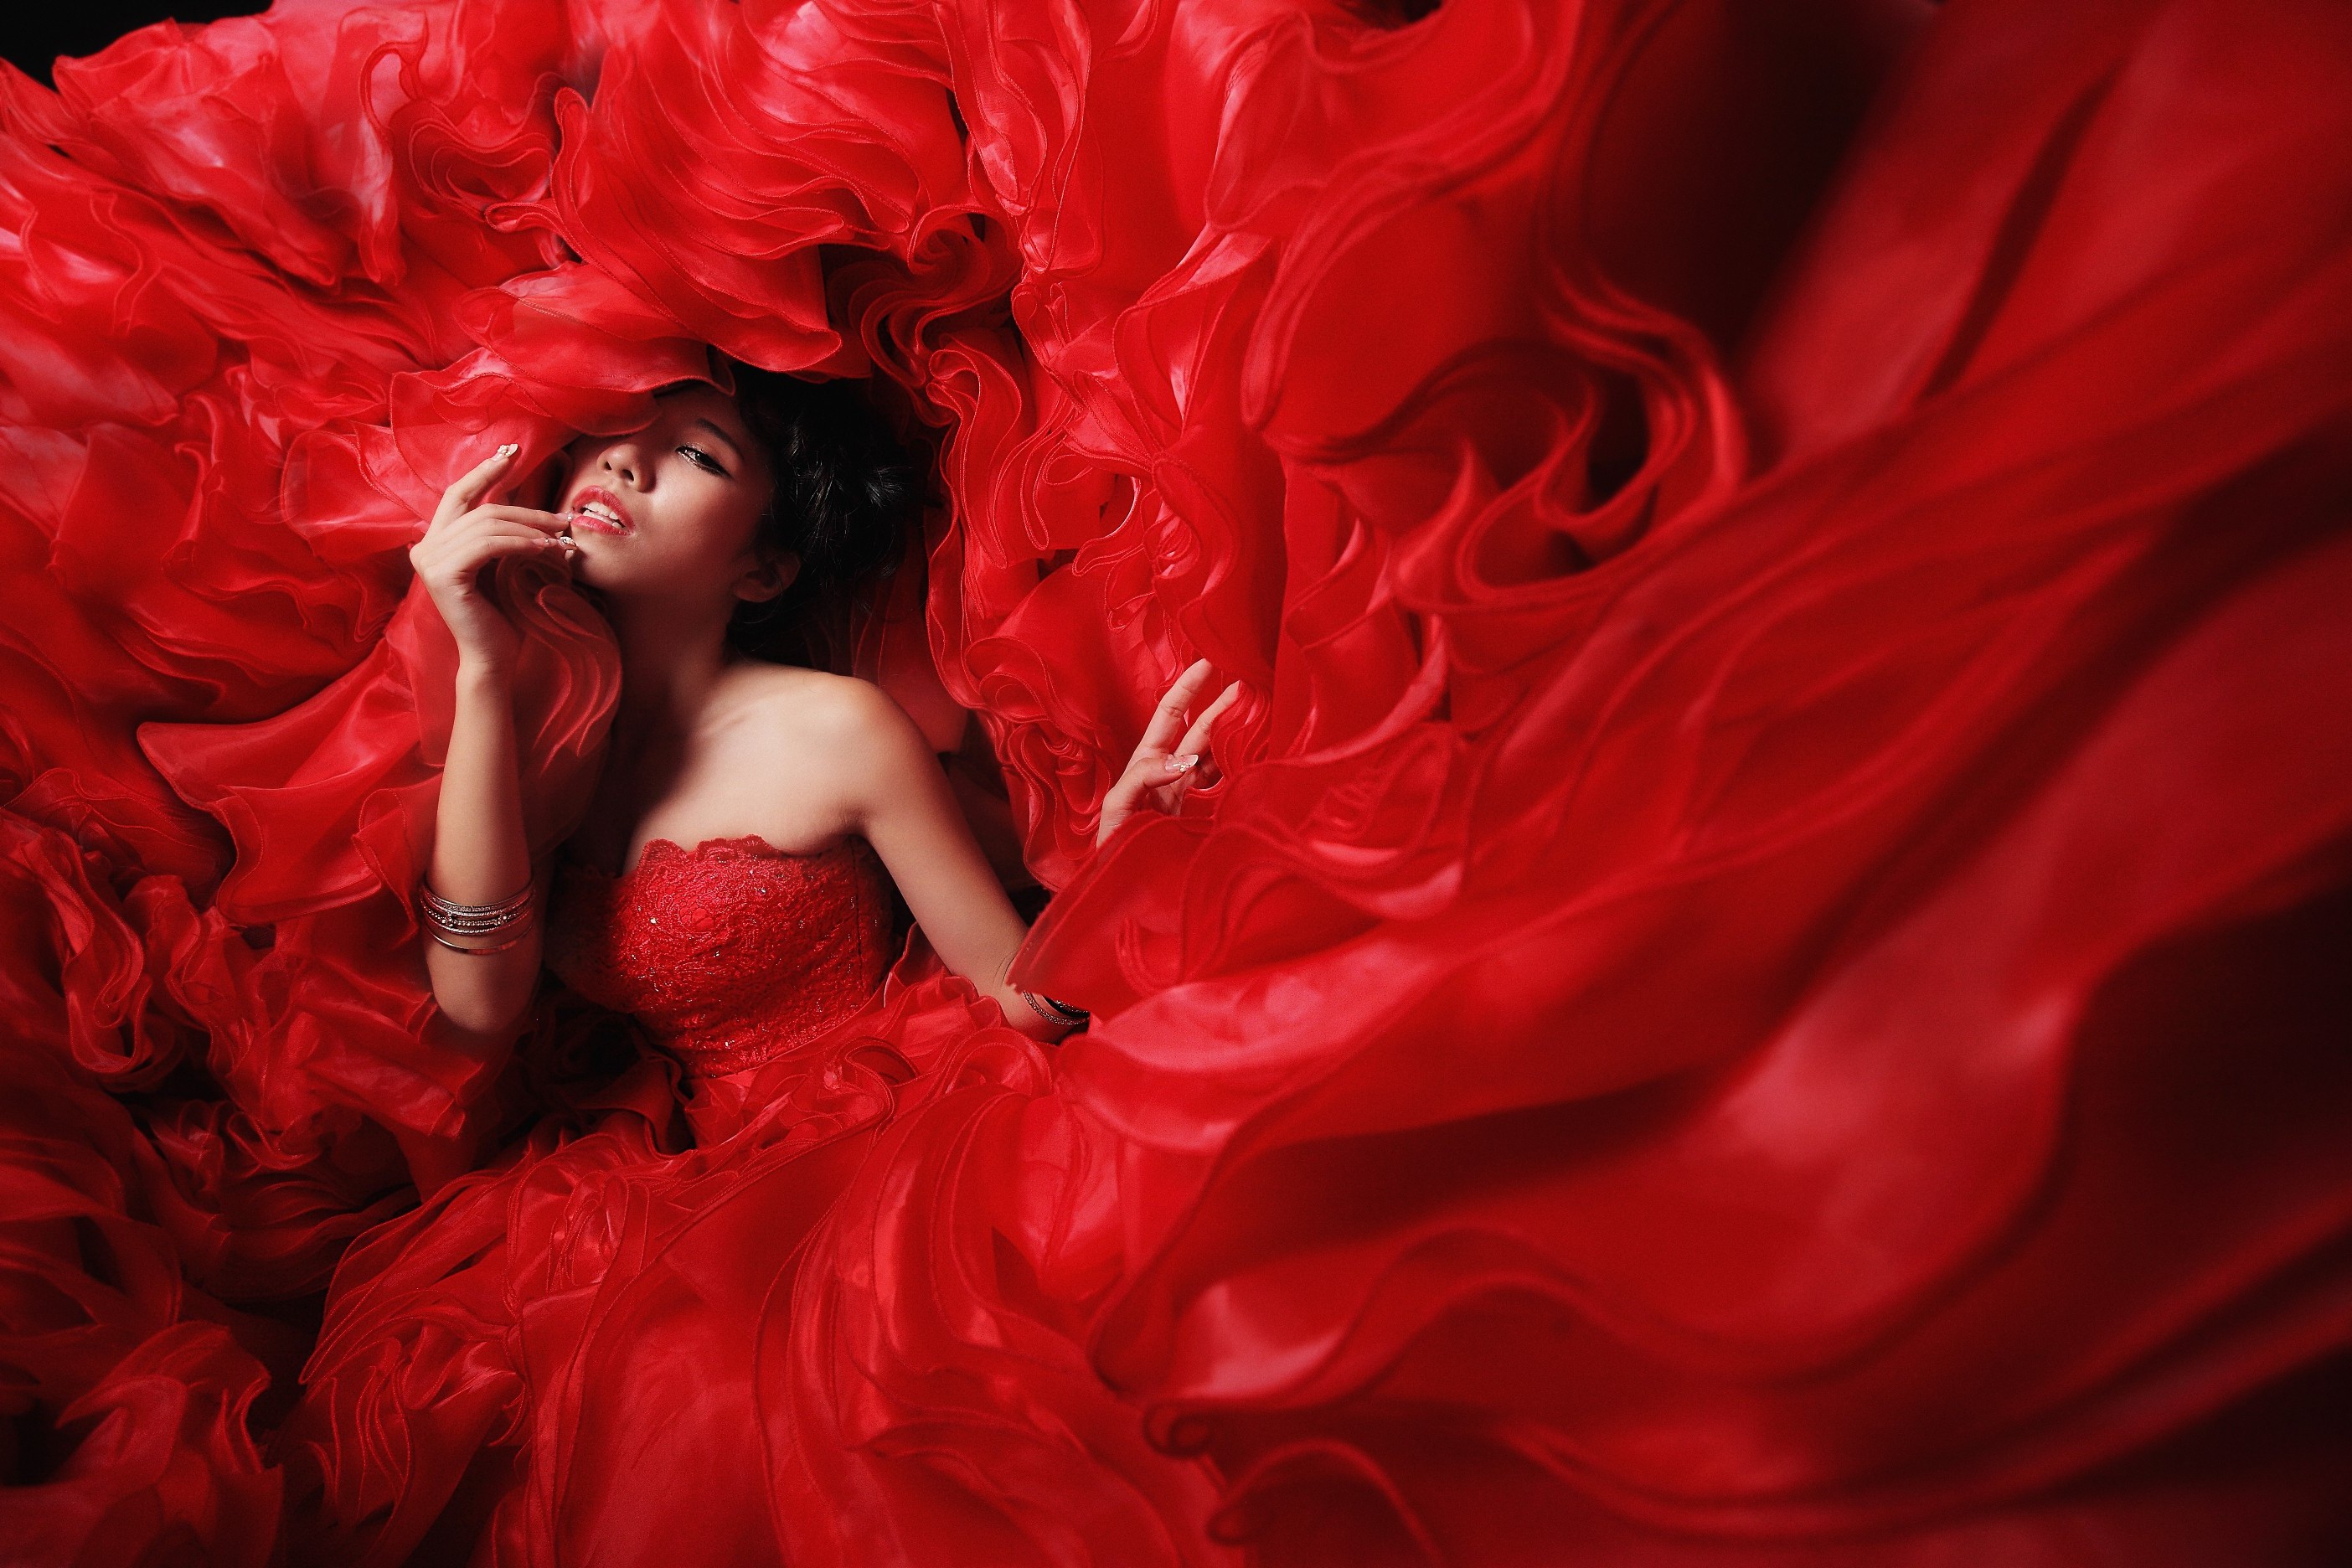 women, Model, Asian, Bare Shoulders, Red, Dress, Red Dress, Fashion, Gowns, Bangles Wallpaper